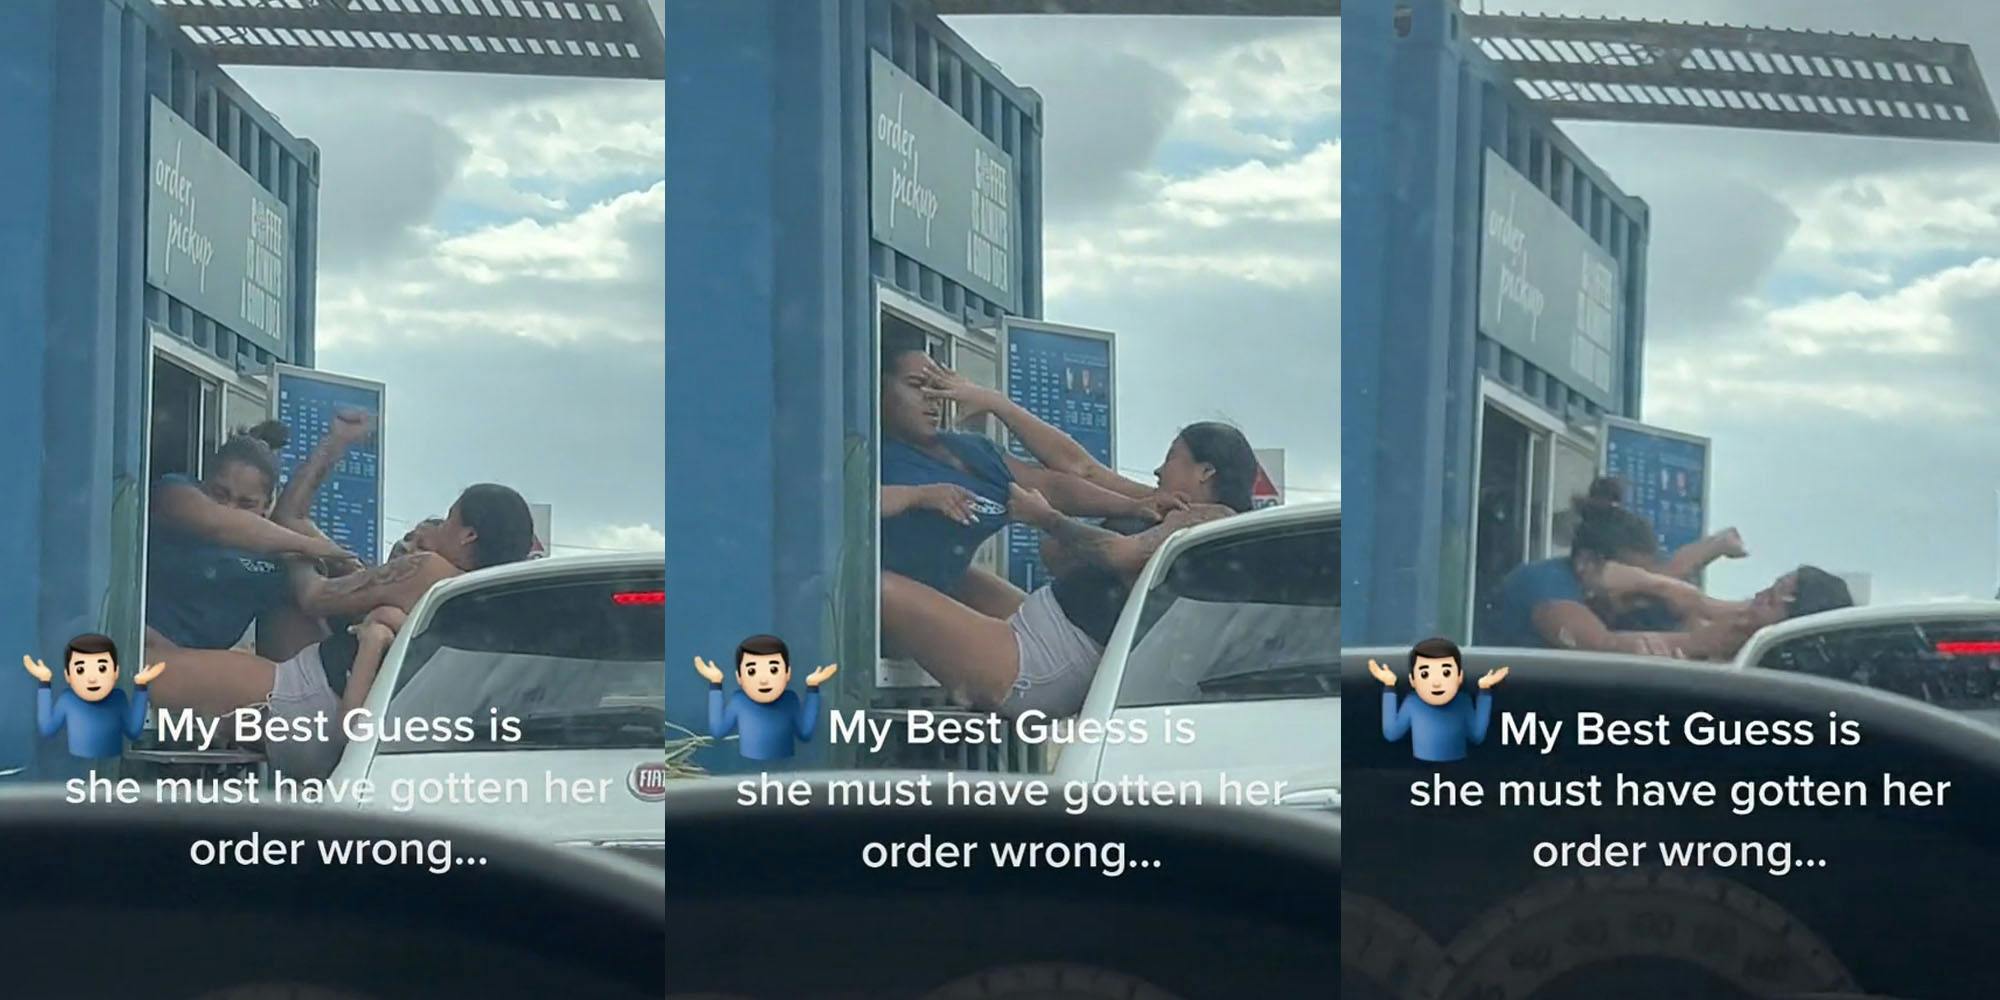 recording from car woman out of window hitting worker worker grabbing womans arm caption "My Best Guess is she must have gotten her order wrong..." (l) recording from car woman out of car window legs going into worker window hand on workers face caption "My Best Guess is she must have gotten her order wrong..." (c) recording from car woman punching worker from car window caption "My Best Guess is she must have gotten her order wrong..." (r)